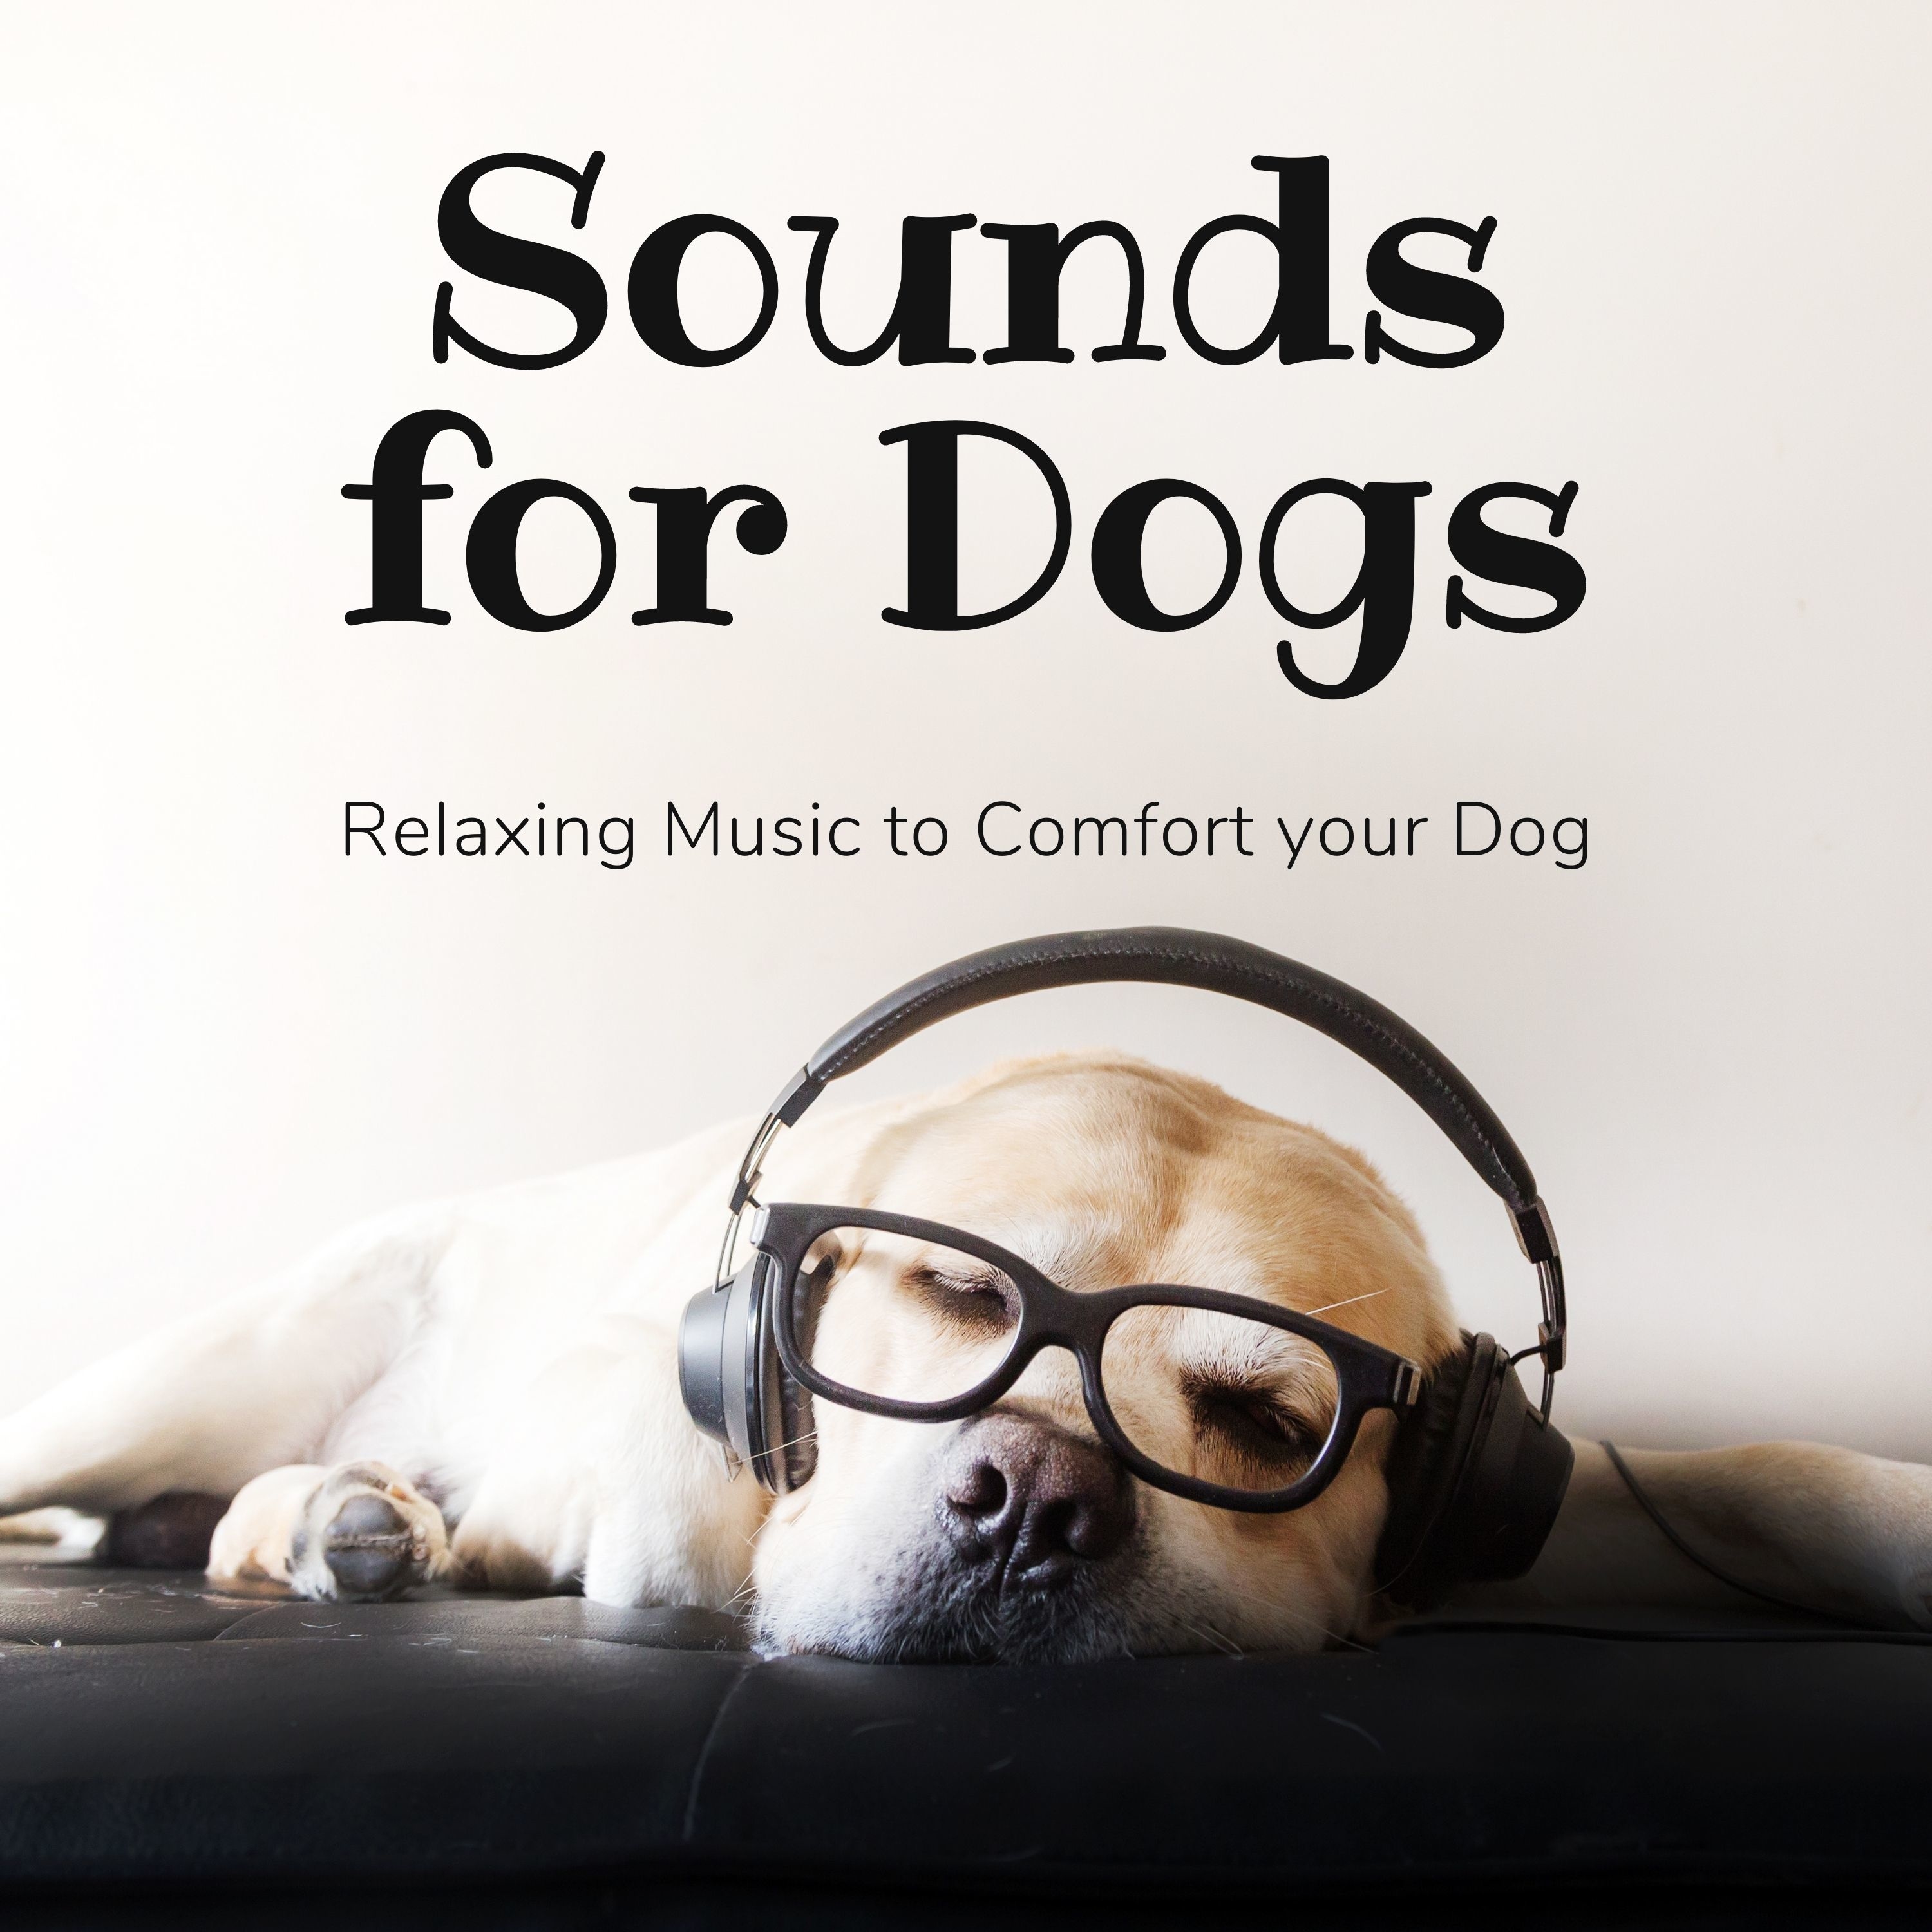 Relaxing sounds for dogs